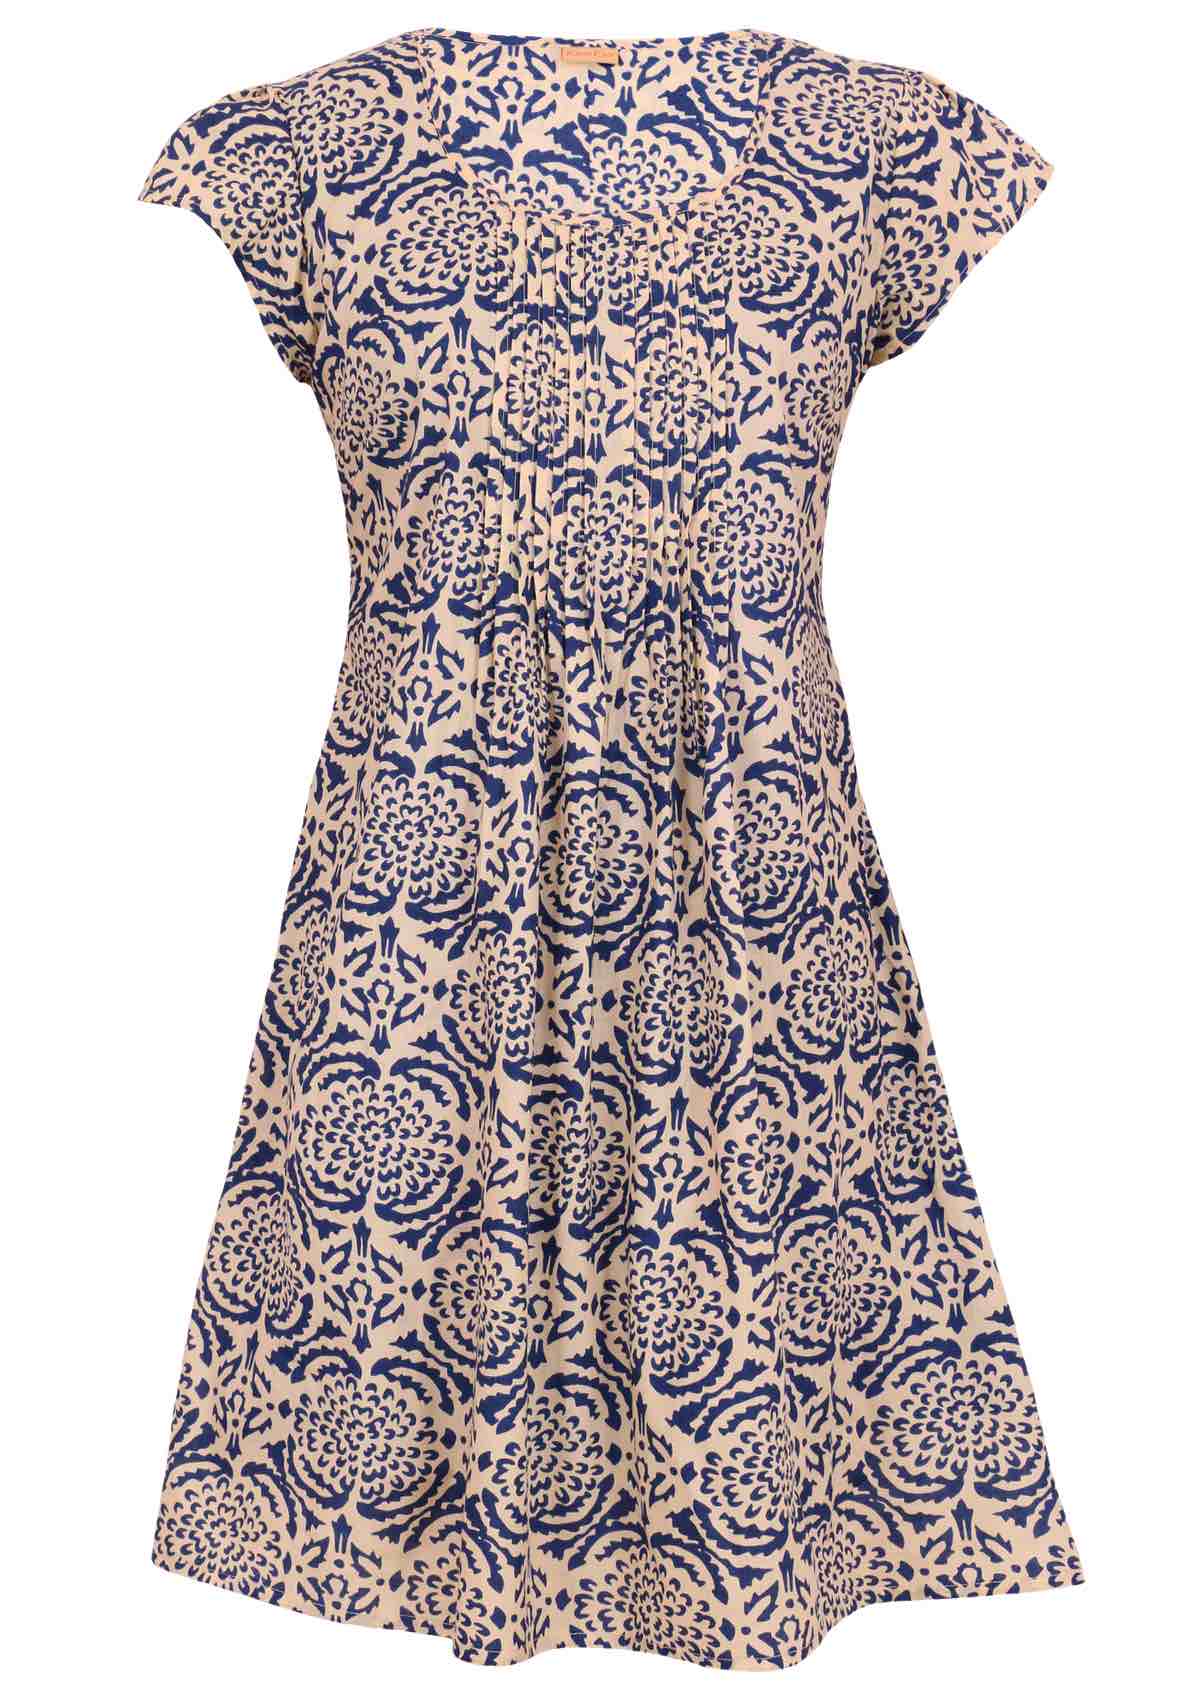 100% cotton dress with blue stamped dahlias on a cream base with a round neckline. 